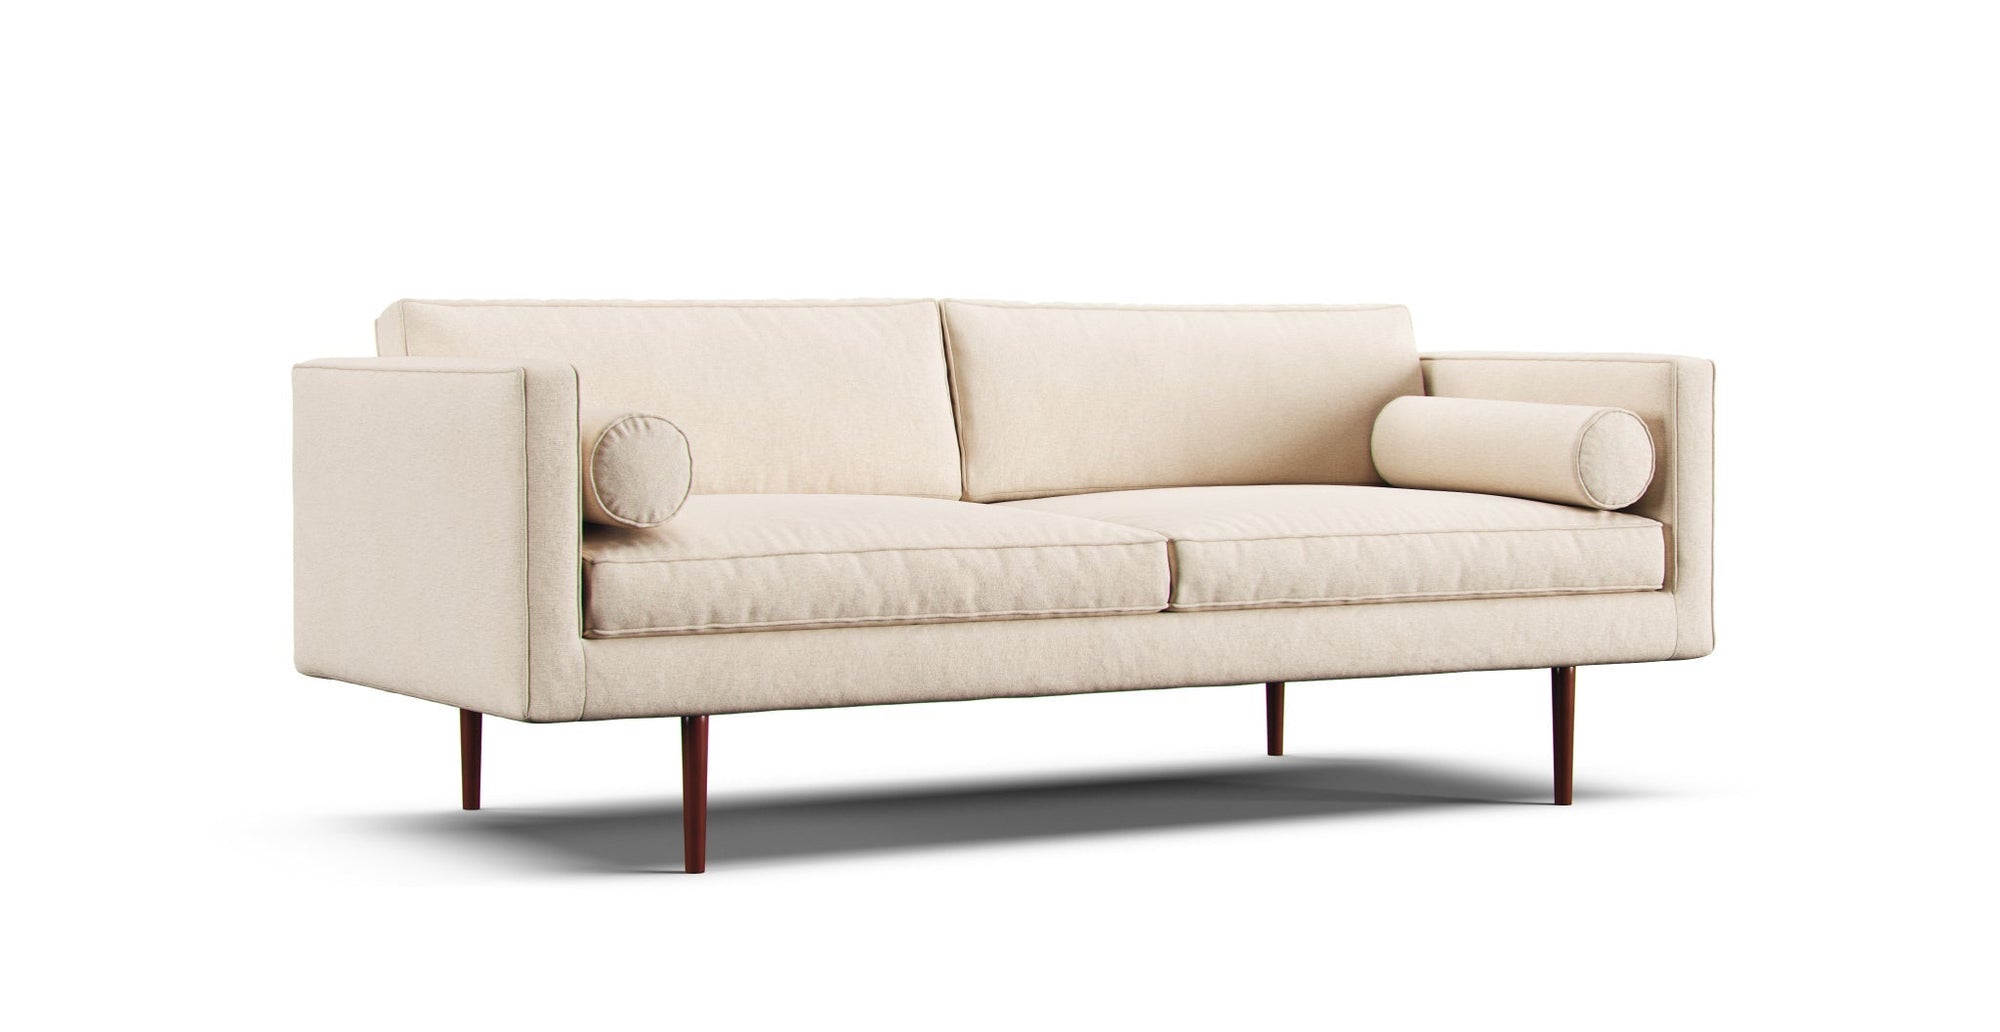 West Elm Monroe Mid-Century eighty inches sofa featuring Pure Linen natural color slipcover